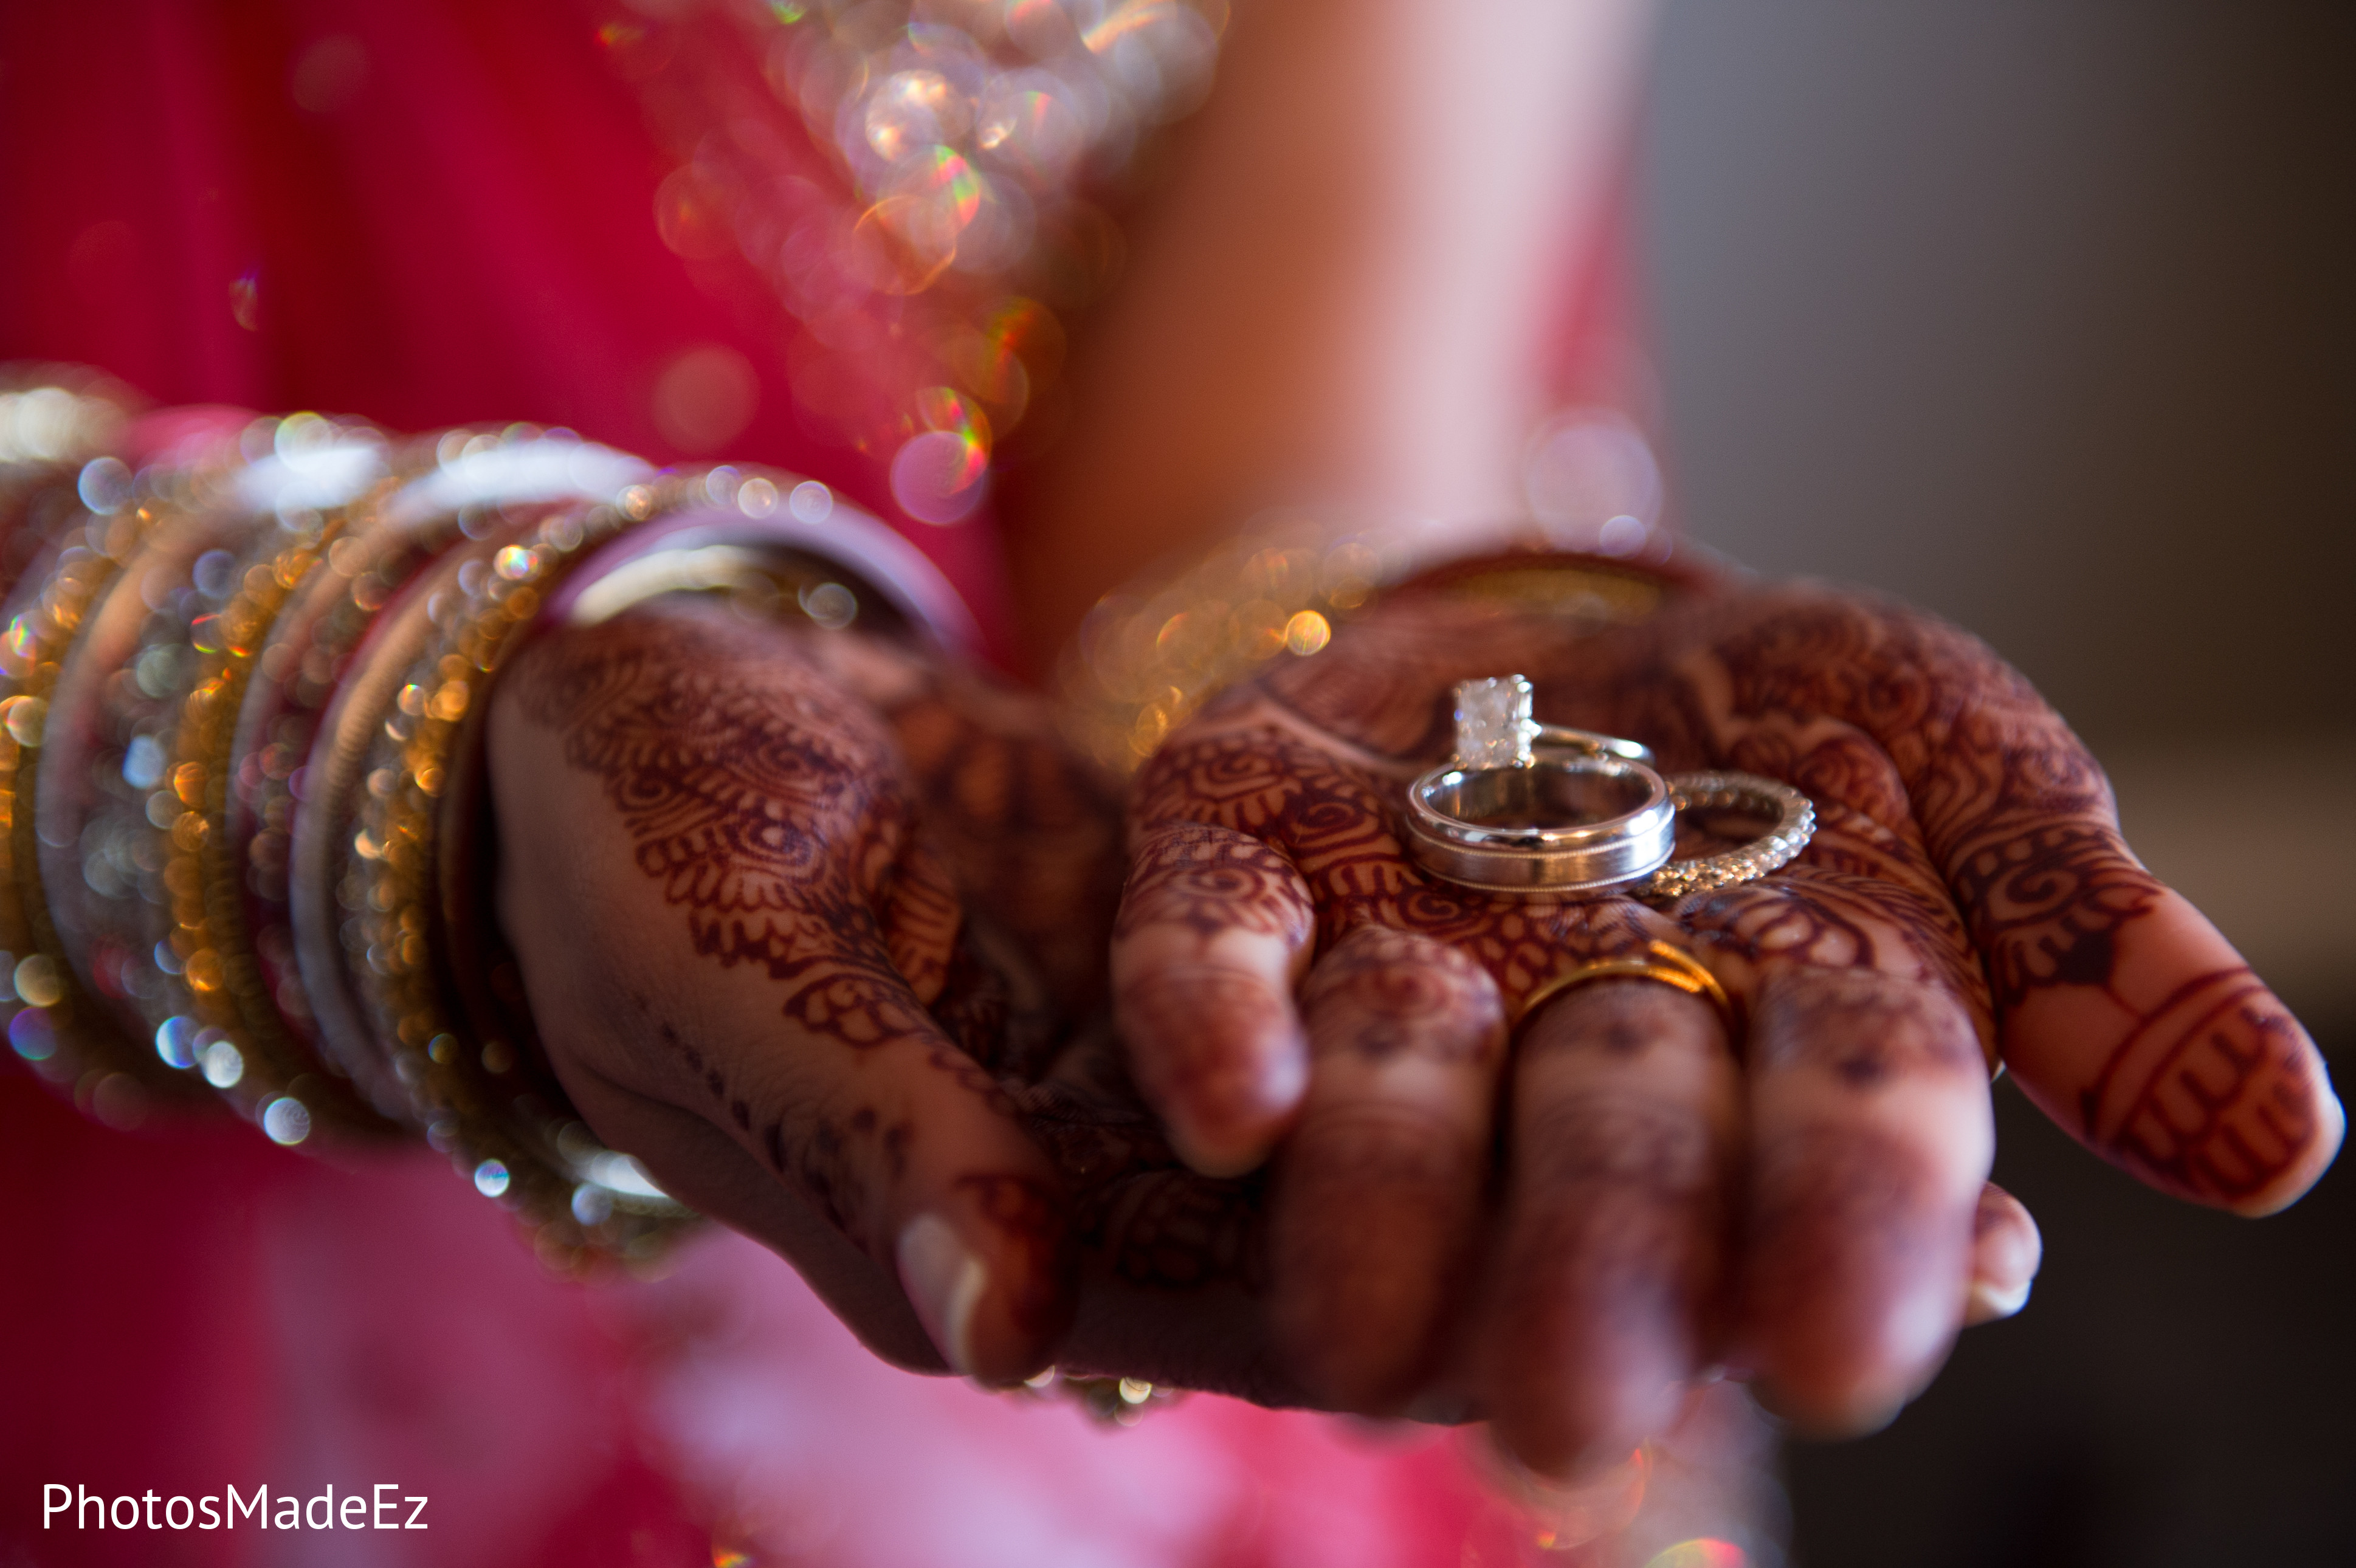 Image of Photo of the couple posing and holding each other's fingers and  showing rings during the typical Indian engagement ceremony.-ED092110-Picxy